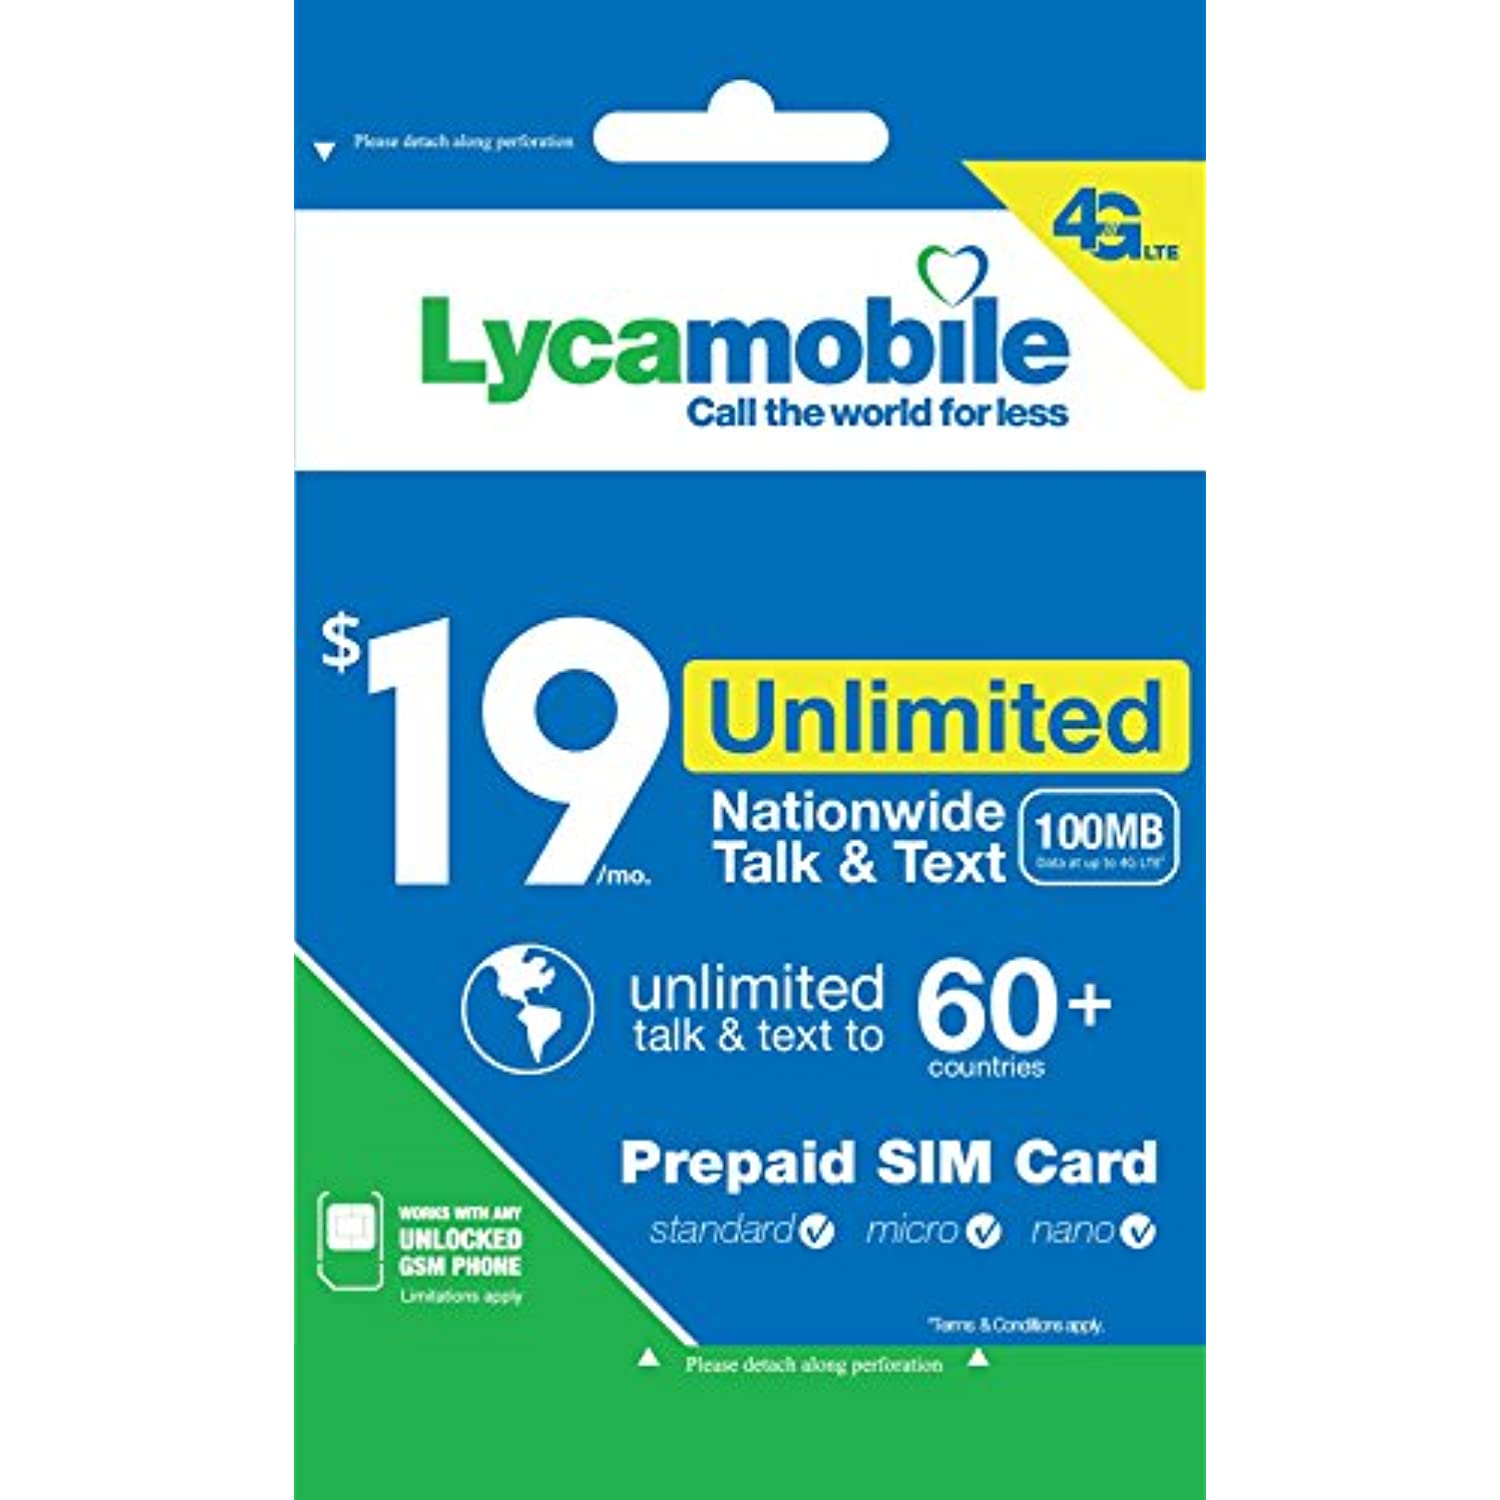 Lyca Mobile Triple Cut SIM Card with $19 Month Unlimited International Plan. Nano / Micro / Standard LycaMobile 4G LTE SIM Card All in One Prefunded Preloaded Activation Kit($19 Monthly Plan)